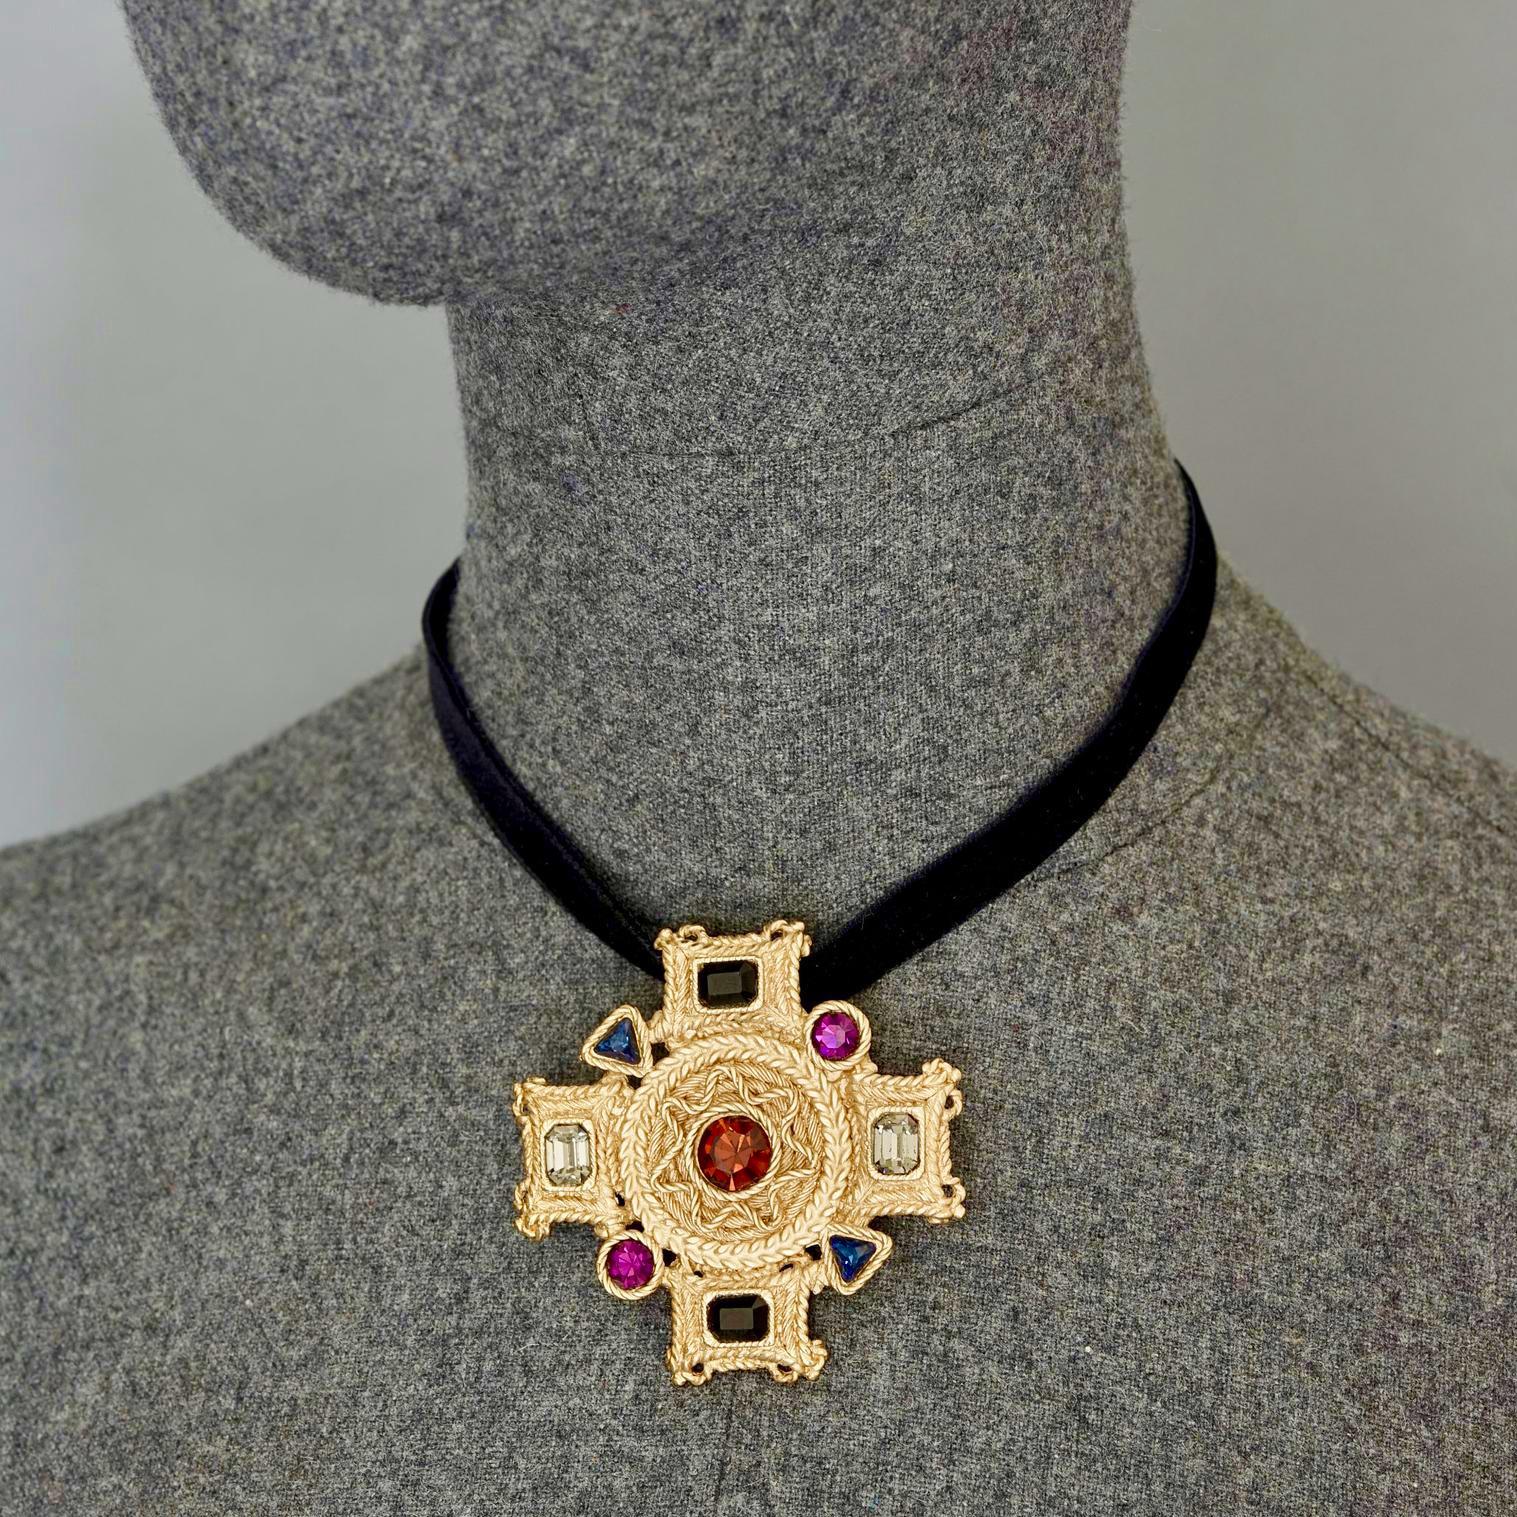 Vintage BALENCIAGA Byzantine Jewelled Cross Pendant Brooch

Measurements:
Height: 2.48 inches (6.3 cm)
Width: 2.48 inches (6.3 cm)

Features:
- 100% Authentic BALENCIAGA.
- Textured Byzantine cross with coloured rhinestones.
- Gold tone.
- Brooch